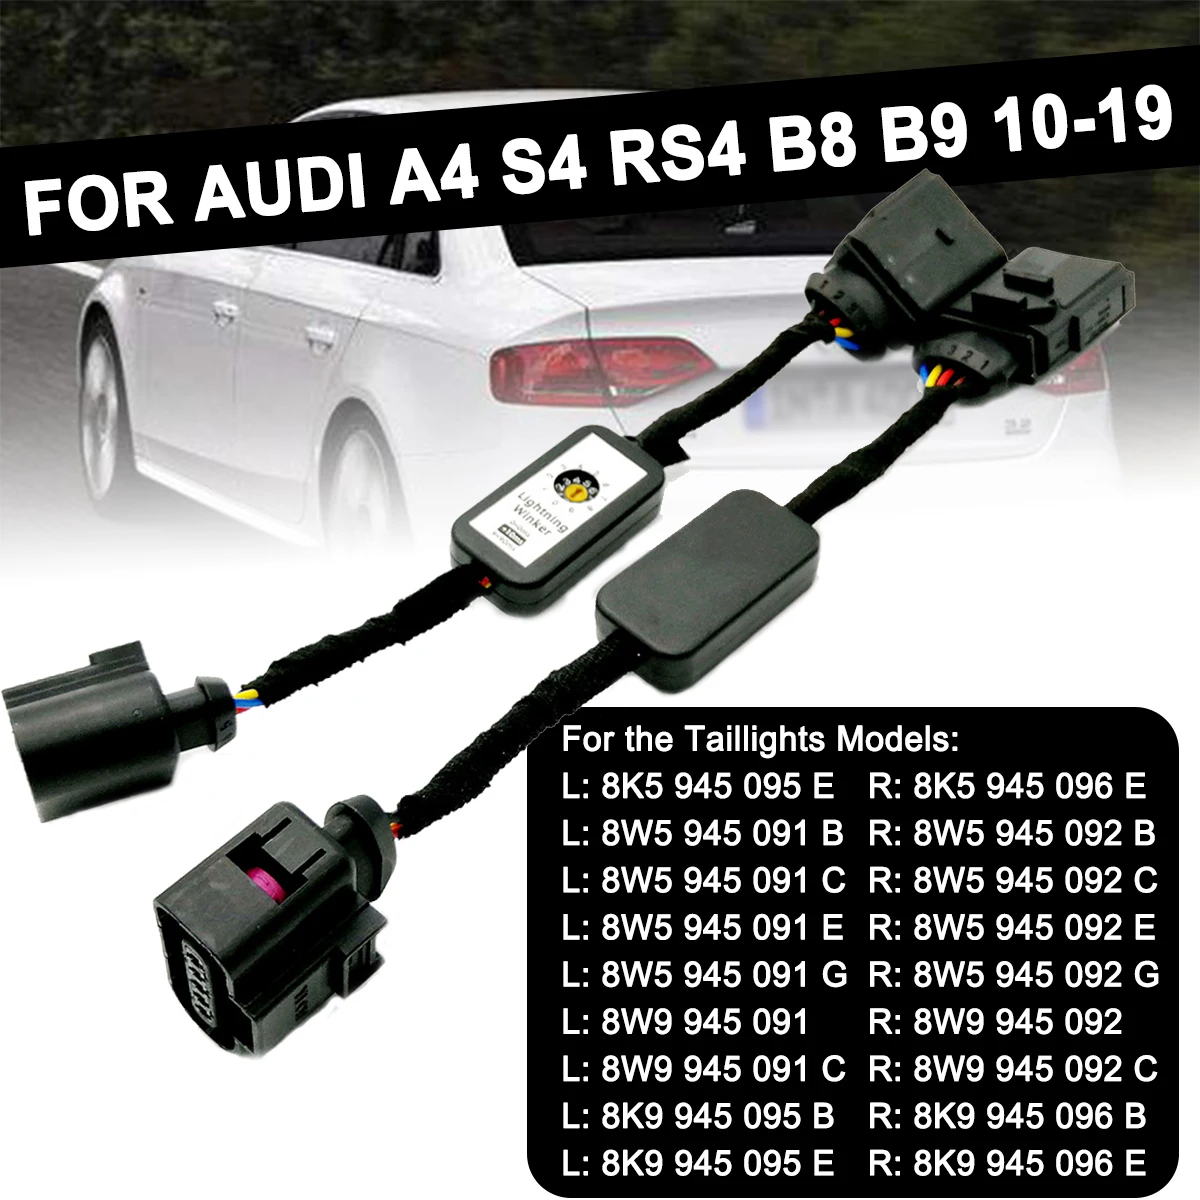 

2pcs Dynamic Turn For Audi A4 S4 RS4 B8 B9 2010-2019 Signal LED Taillight Add-on Module Wire Indicator Left & Right Tail Light